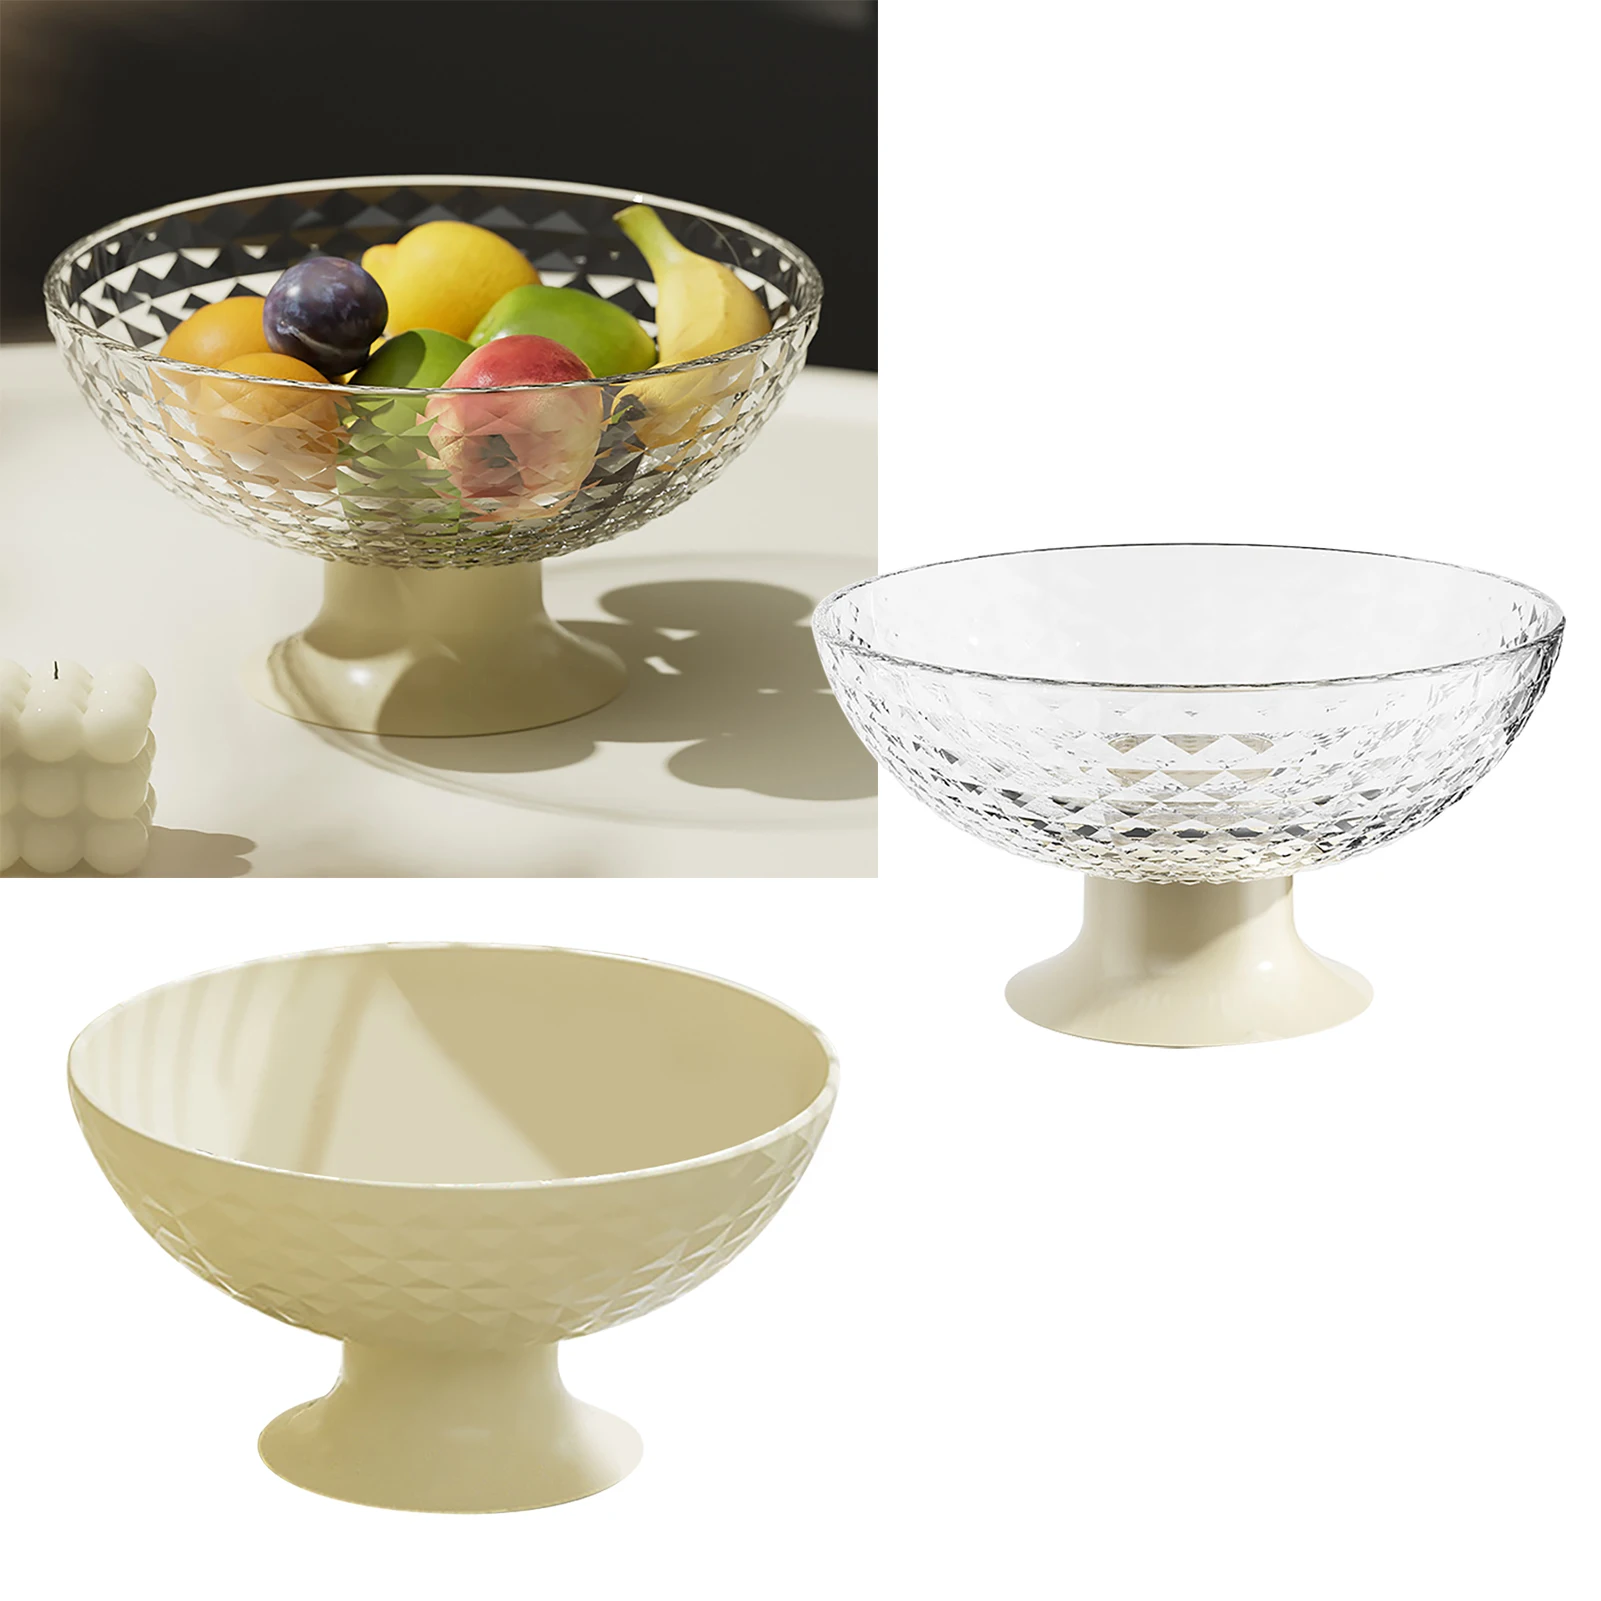 

Fruit Tray Plate Holder Plastic Footed Snacks Vegetables Fruits Basket Bowl for Kitchen Counter Dining Room Tables